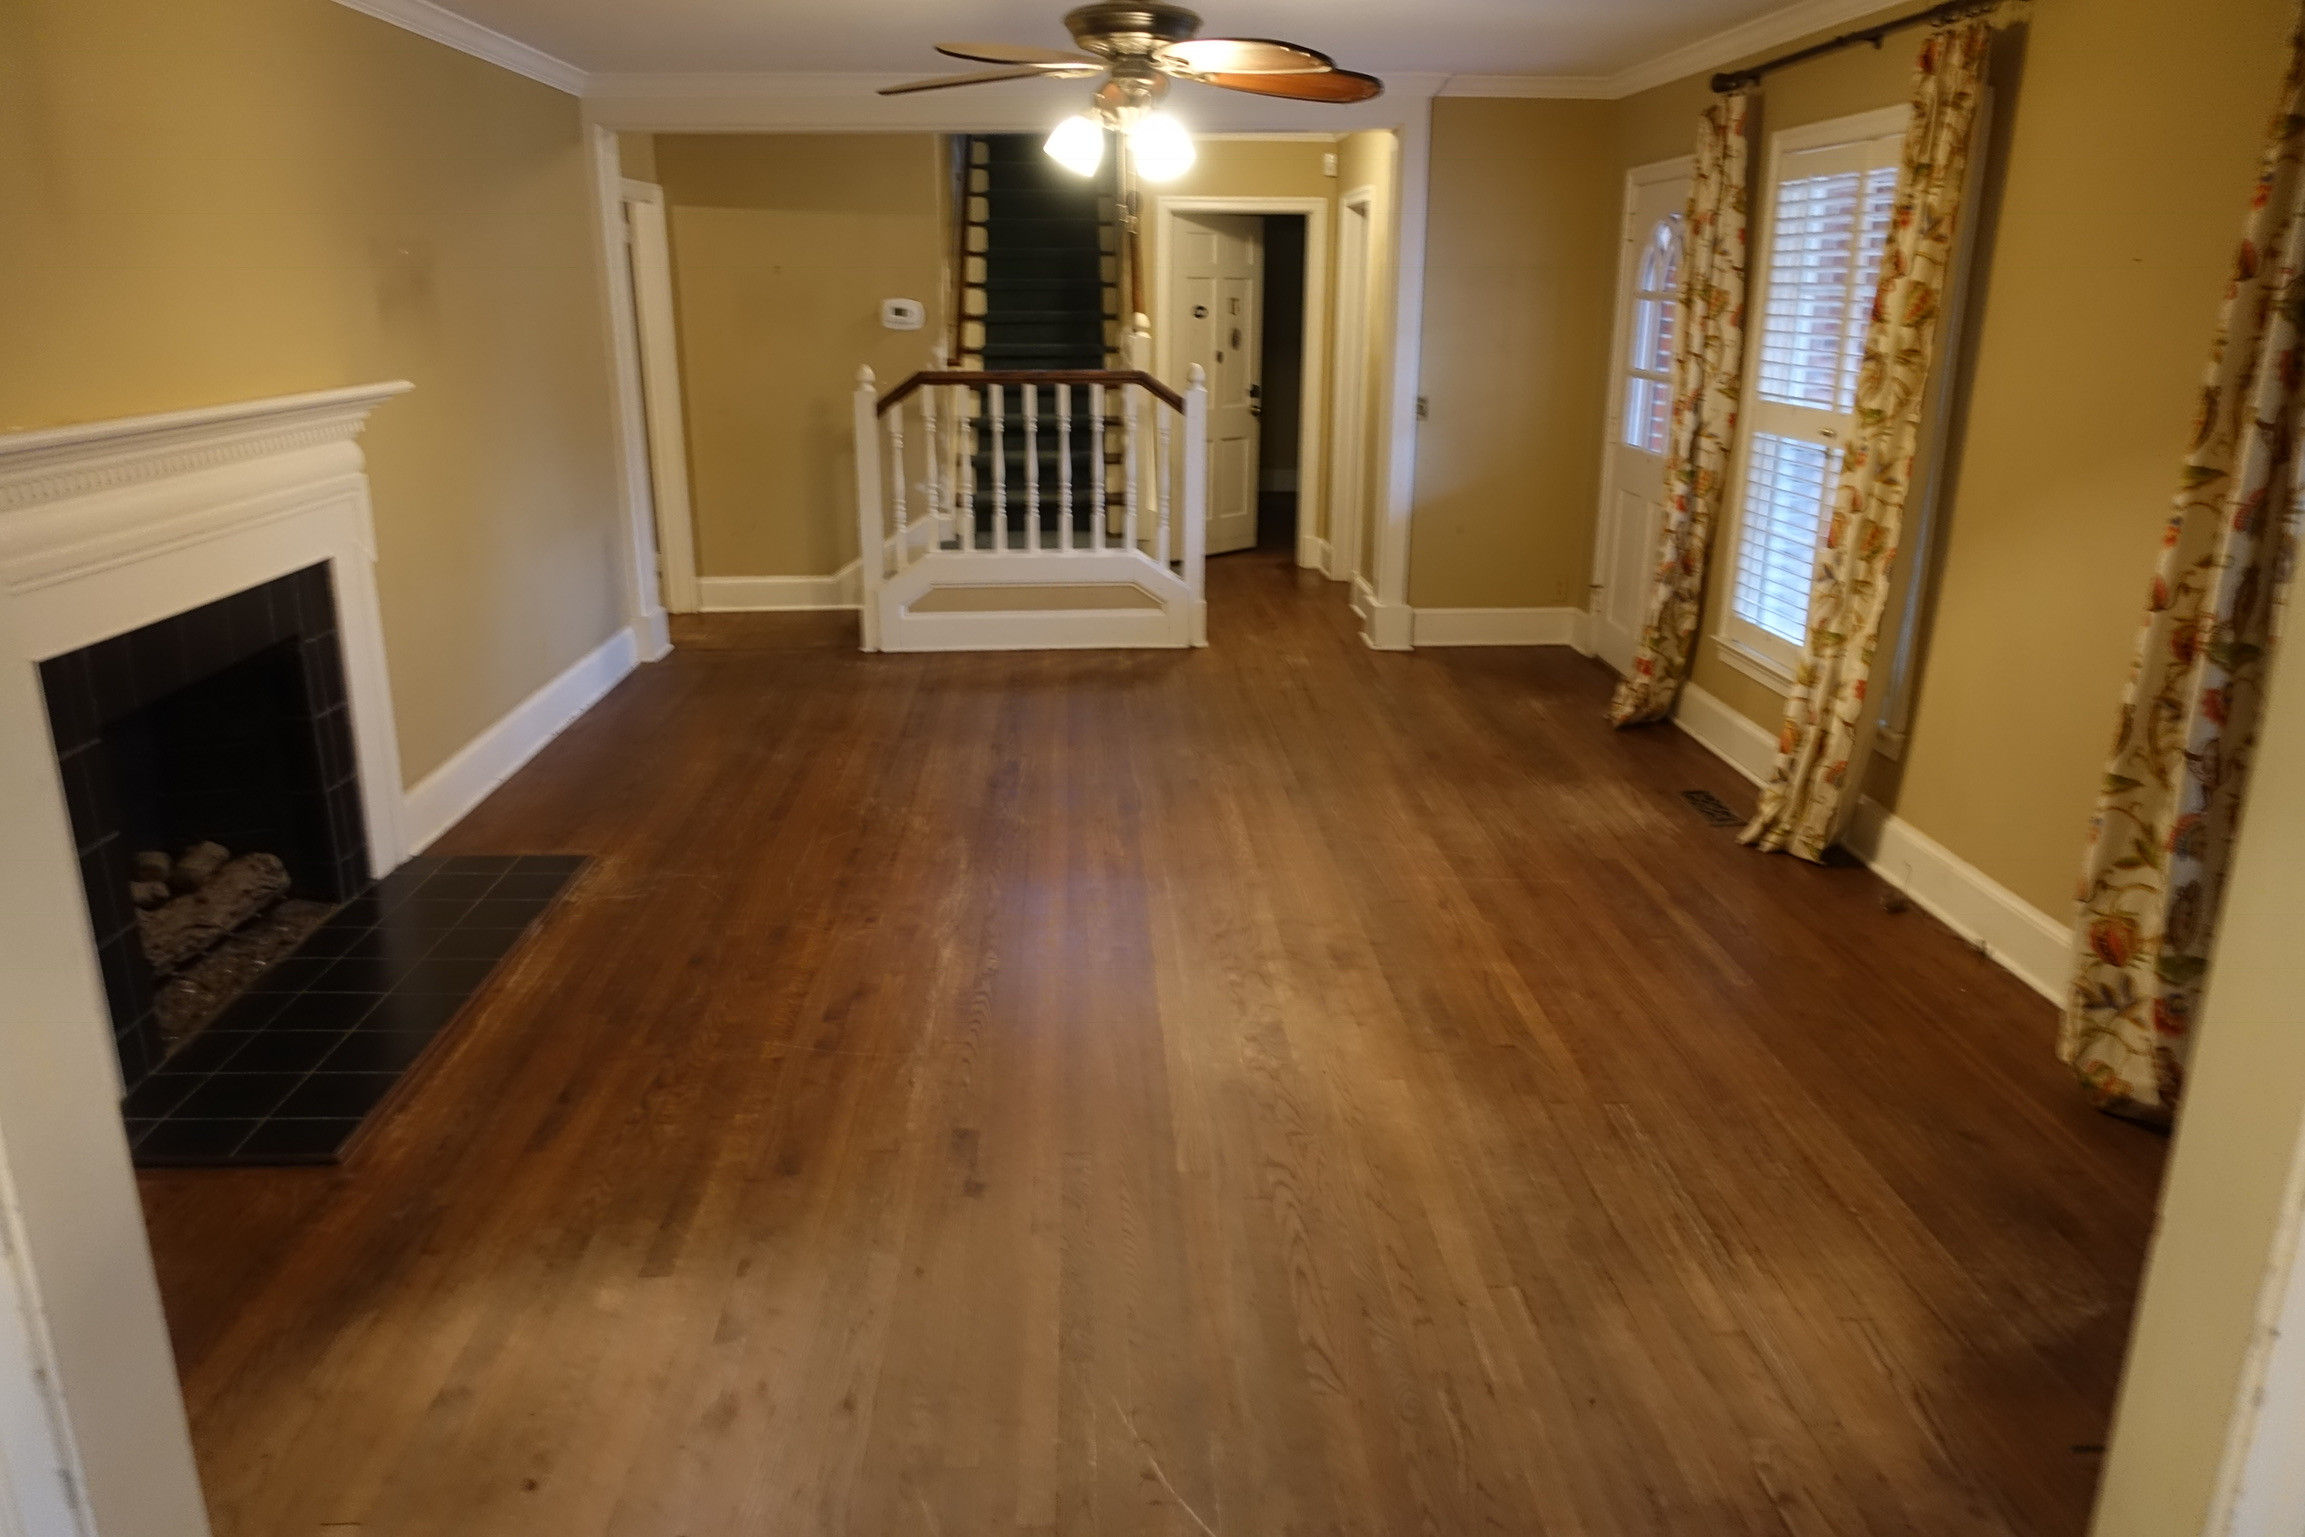 27 attractive Hardwood Floor Refinishing Florence Sc 2024 free download hardwood floor refinishing florence sc of 1212 jackson ave florence sc 29501 realestate com with regard to is668s9ncrvpqk1000000000